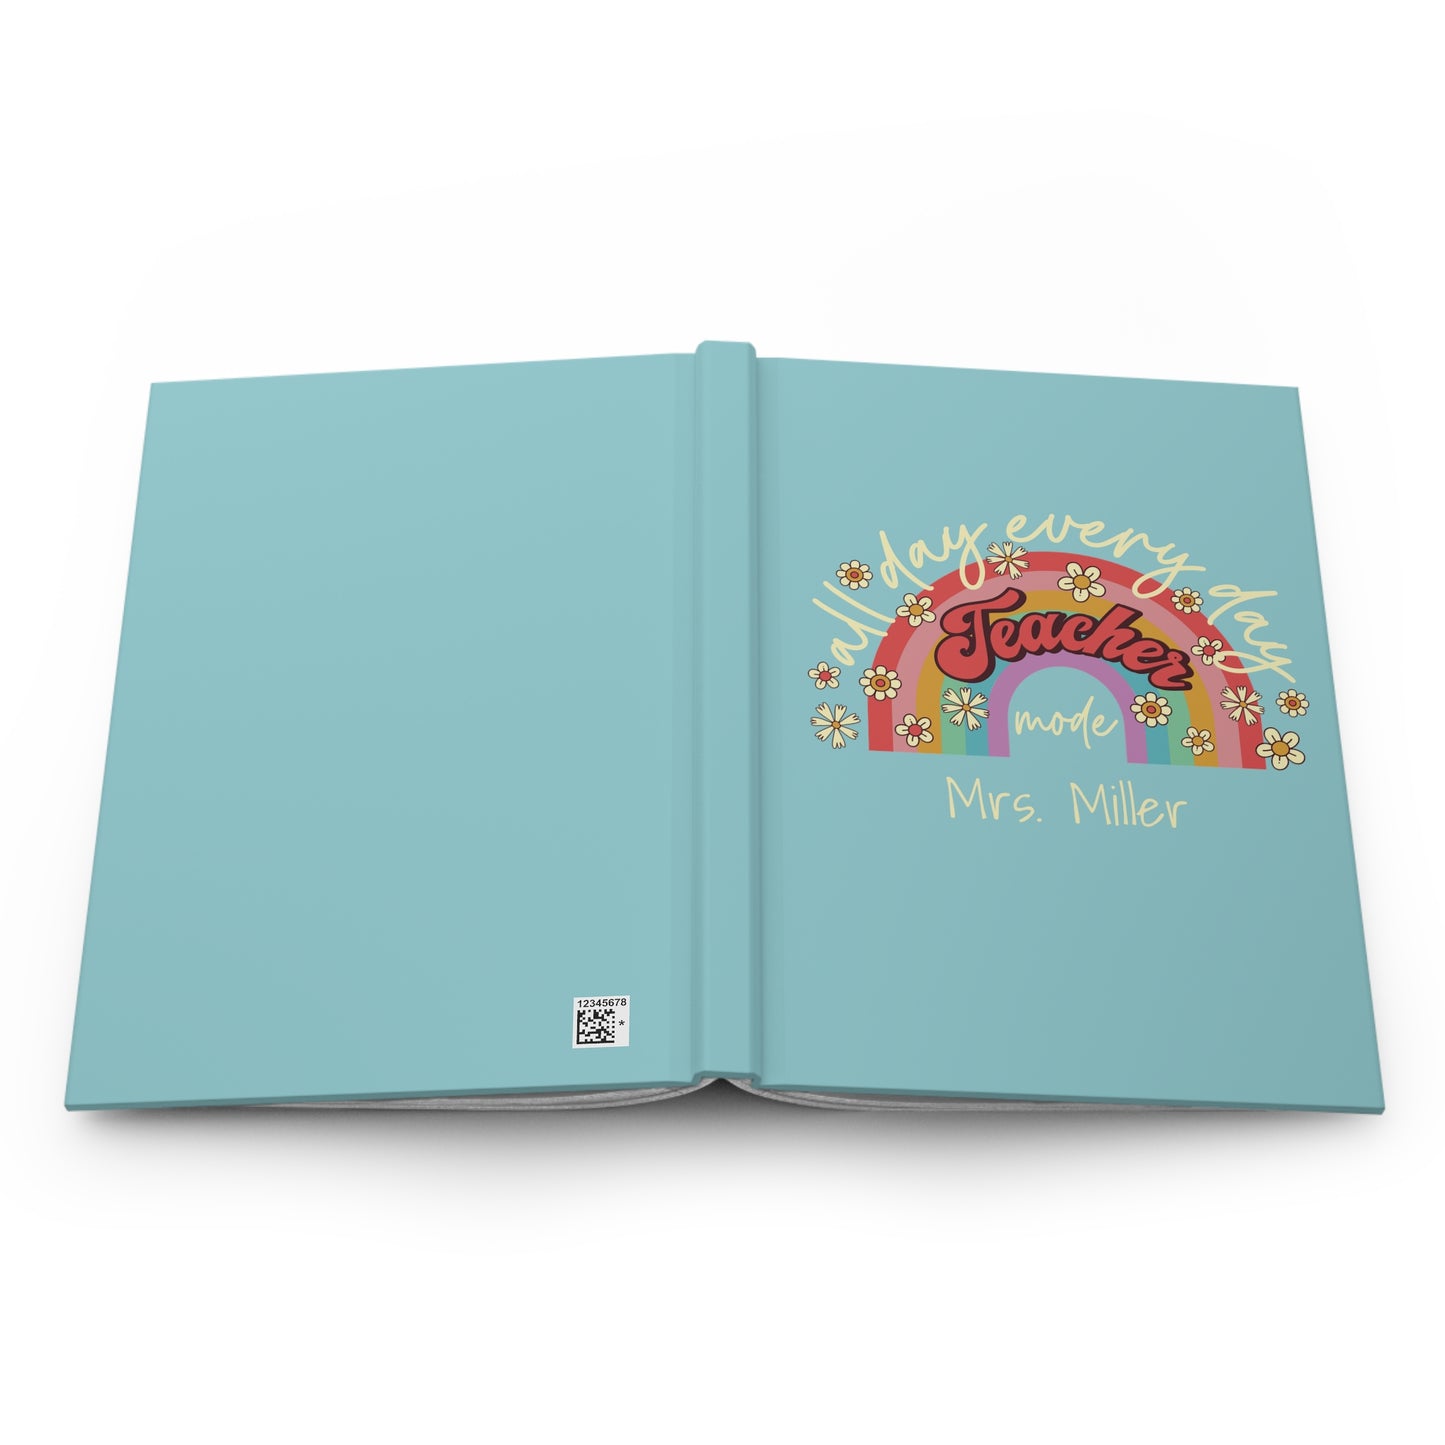 Personalized All Day Every Day Teacher Notebook